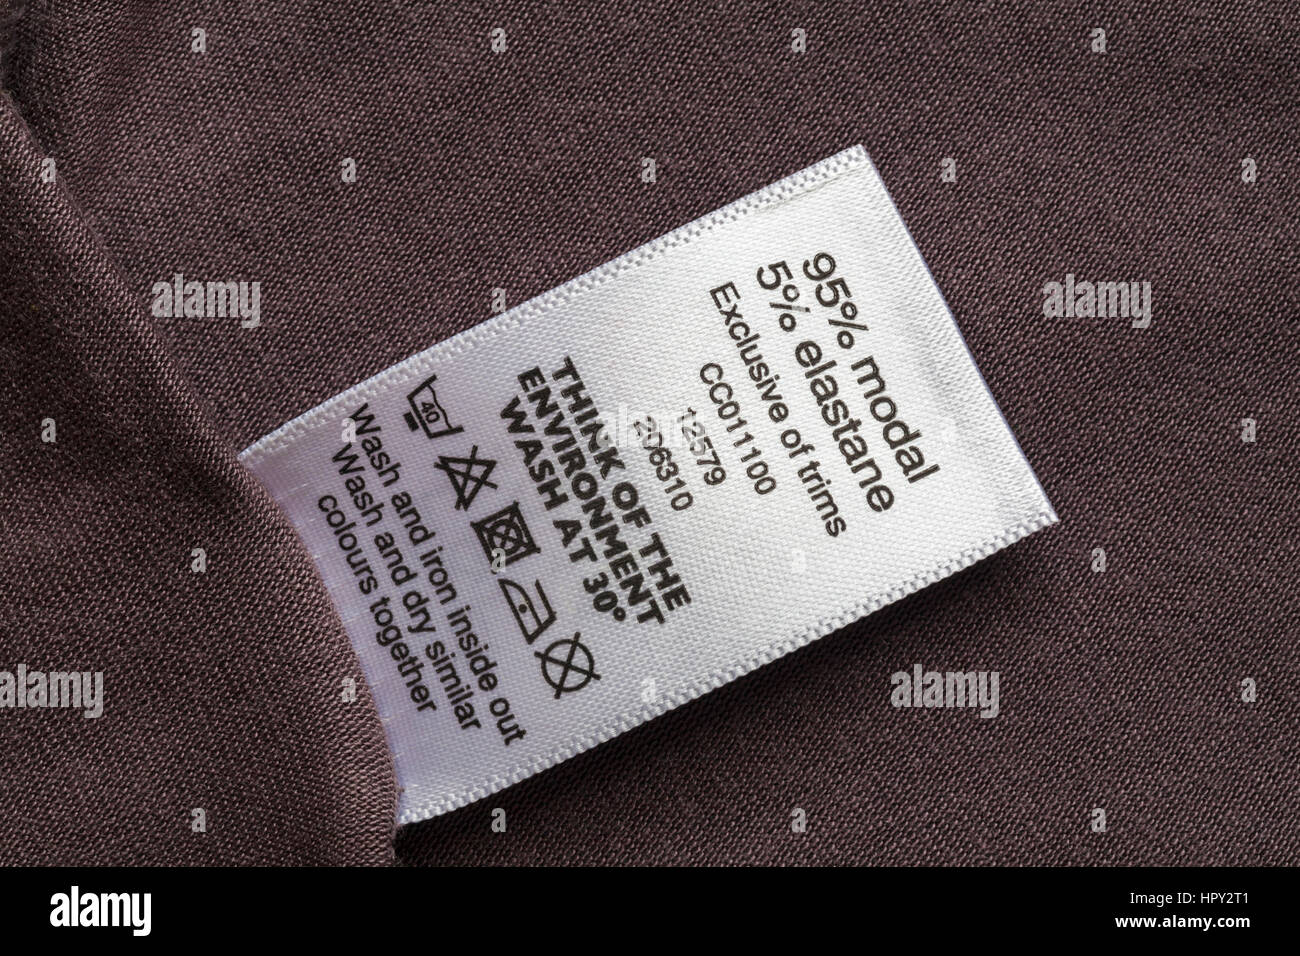 95% cotton 5% spandex label in woman's little black dress with beads made  in Hong Kong with wash care symbols and instructions Stock Photo - Alamy